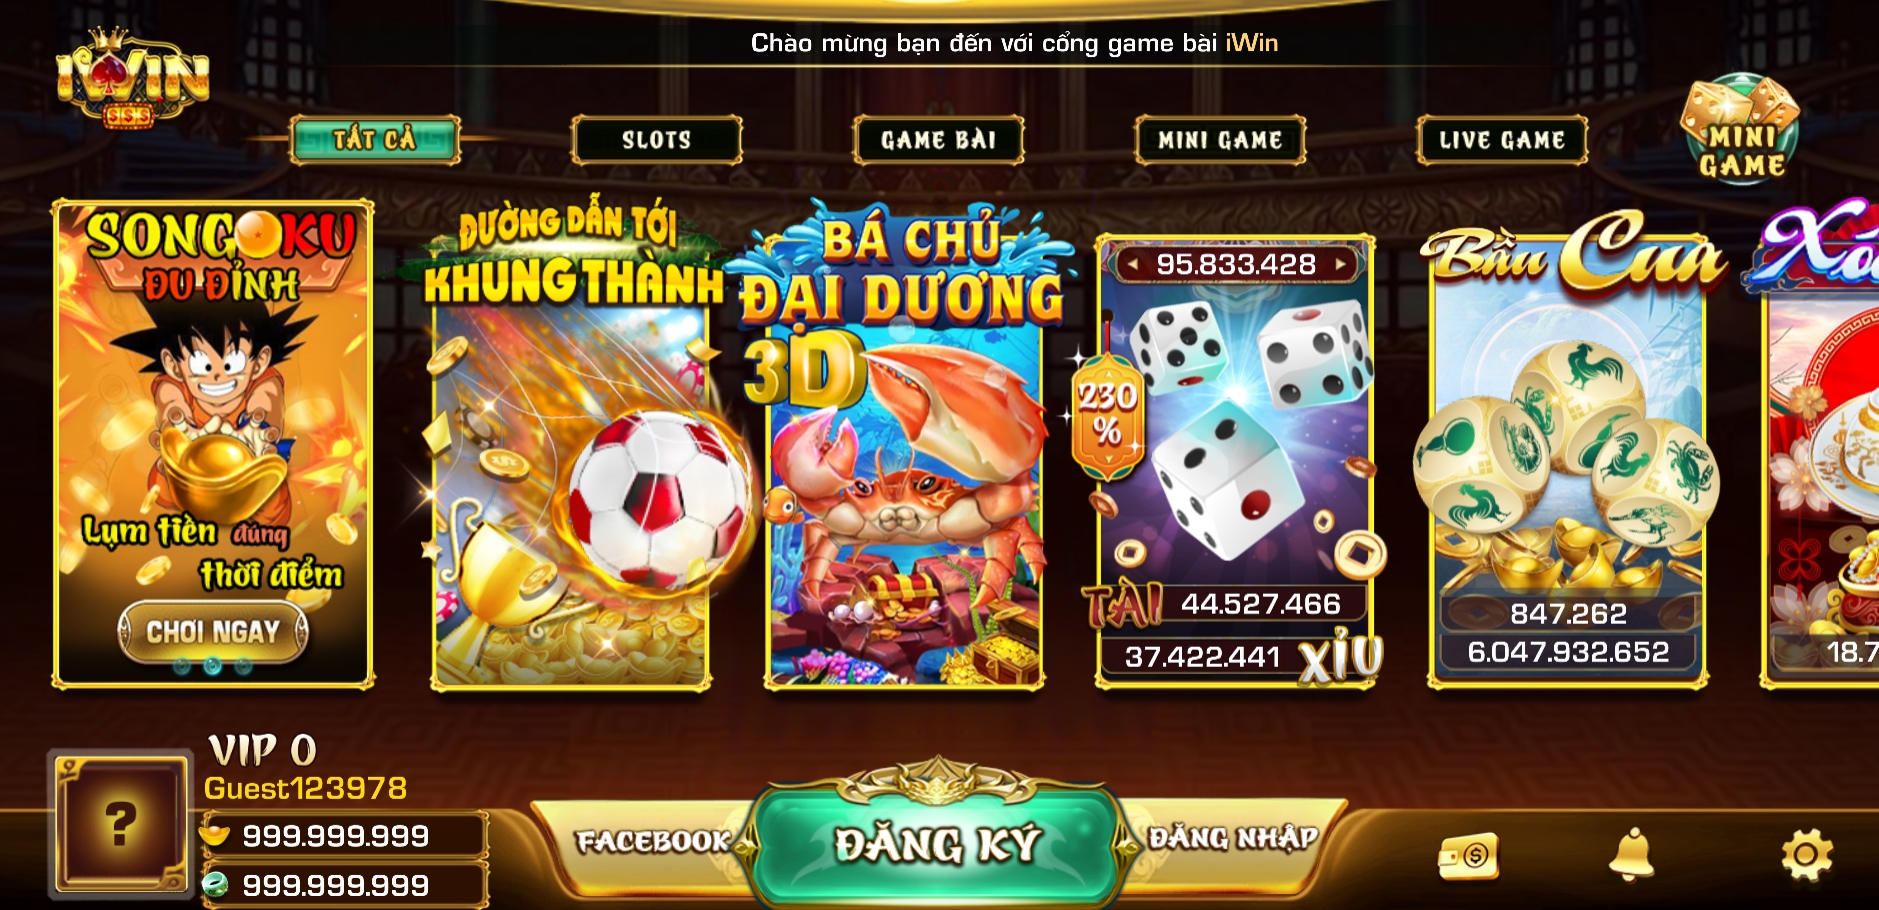 link vao cong game iwin3 club moi nhat